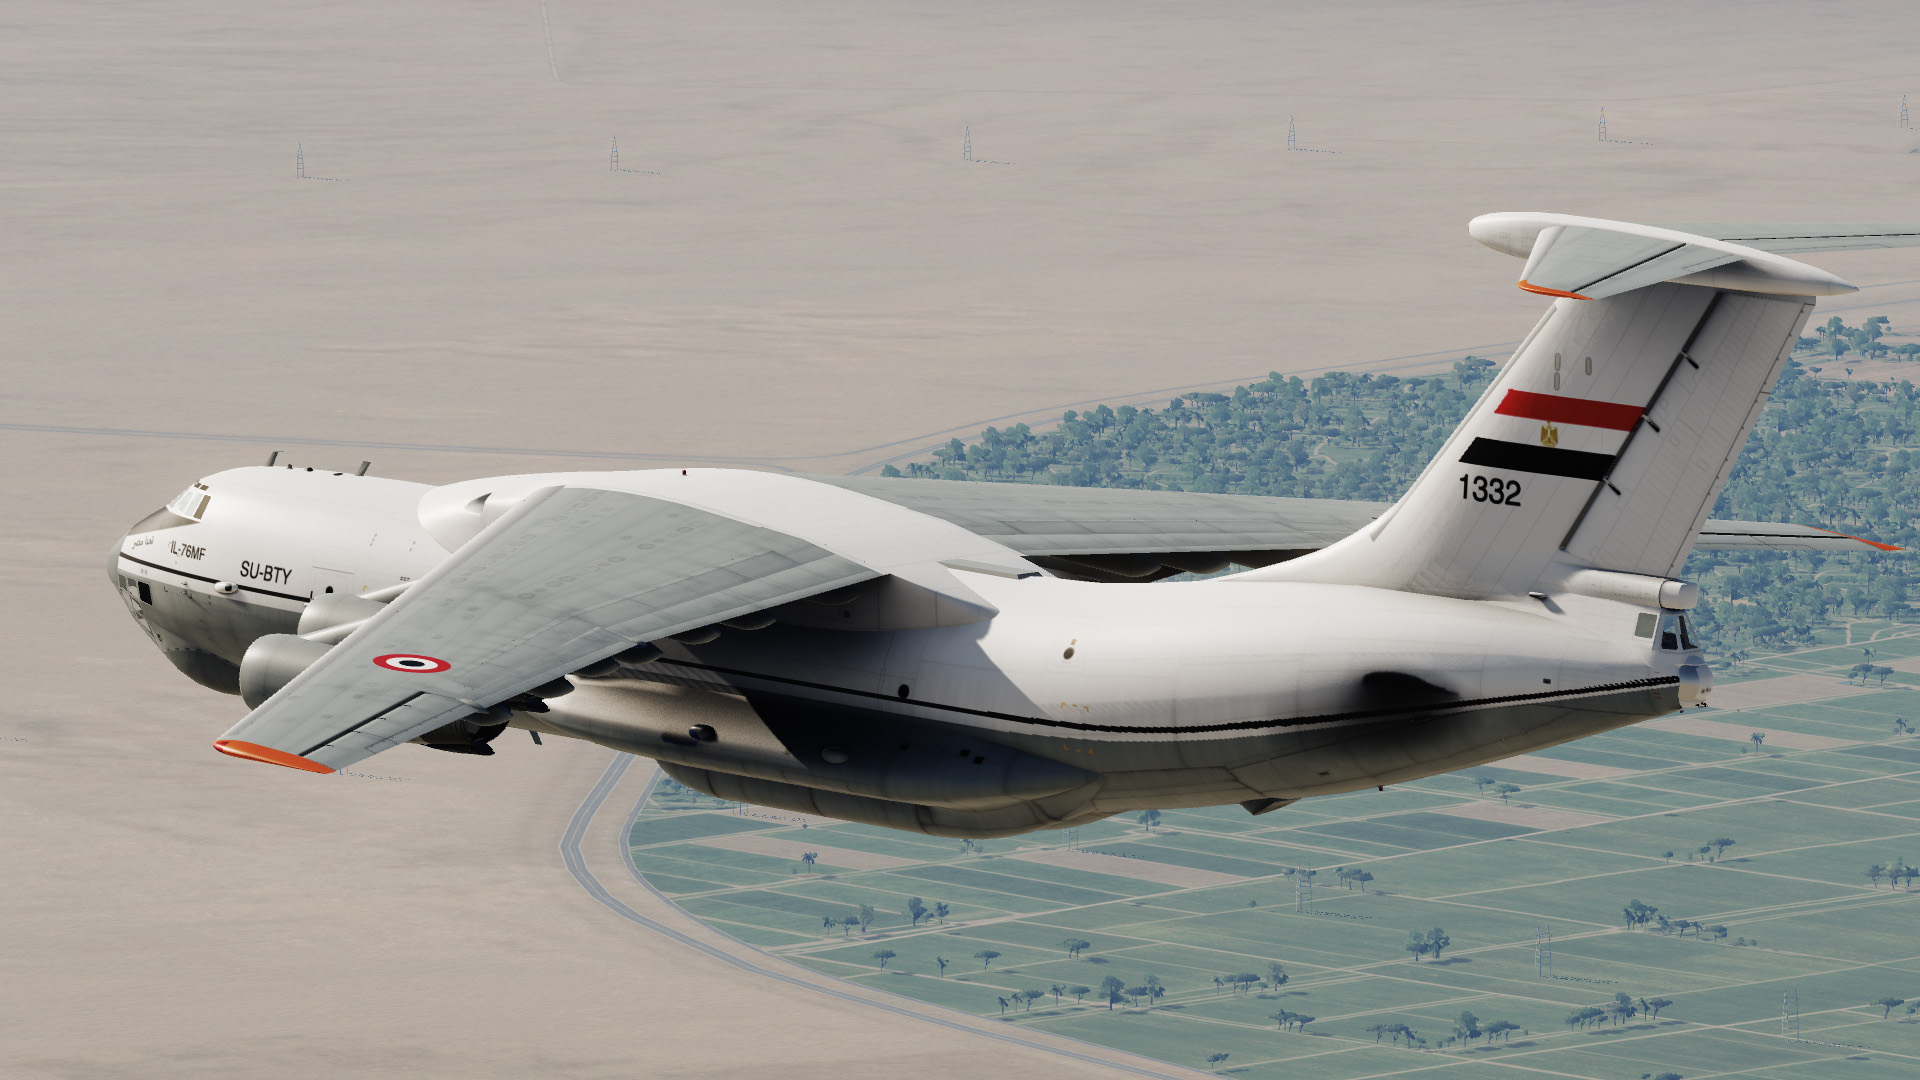 Egyptian Air Force IL-76